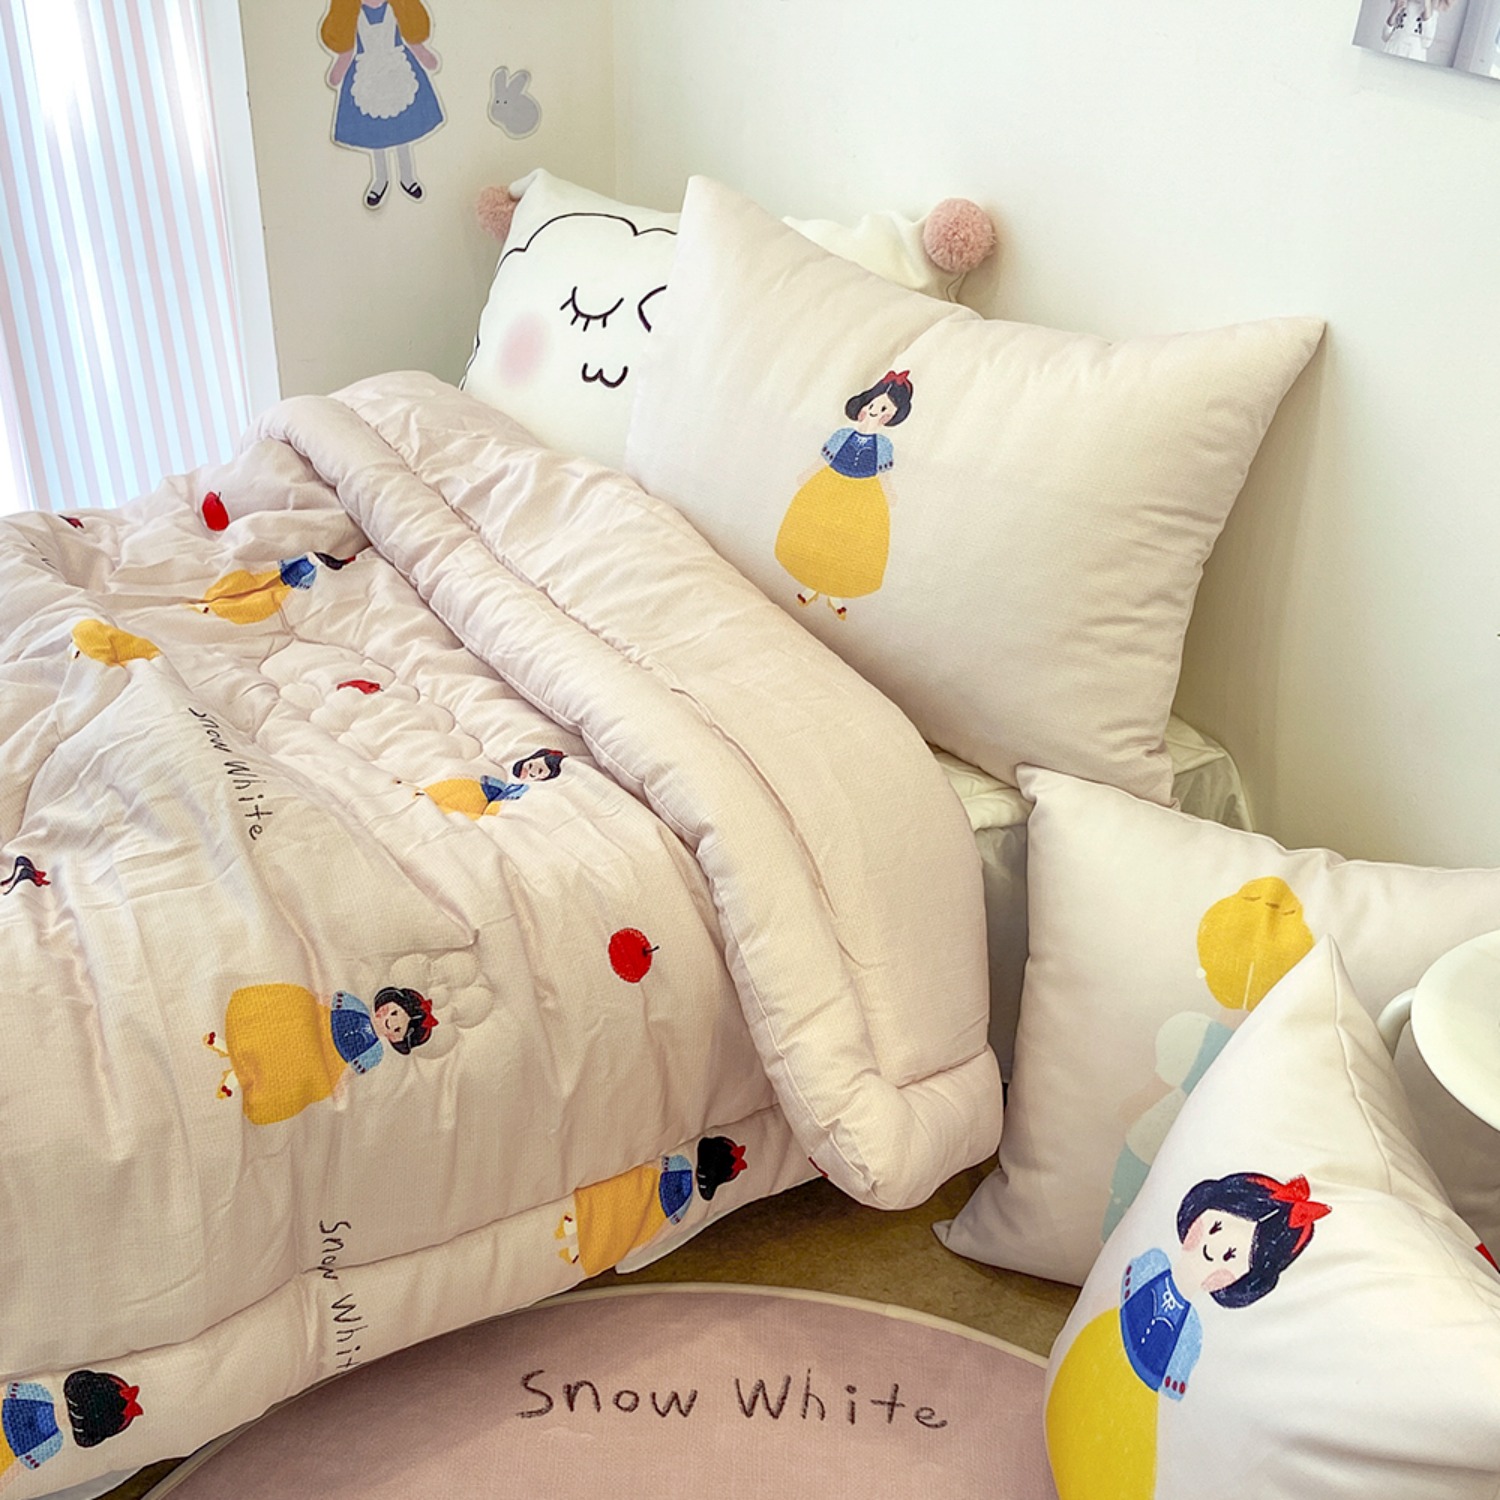 [drawing AMY] Snow white bed comforter set